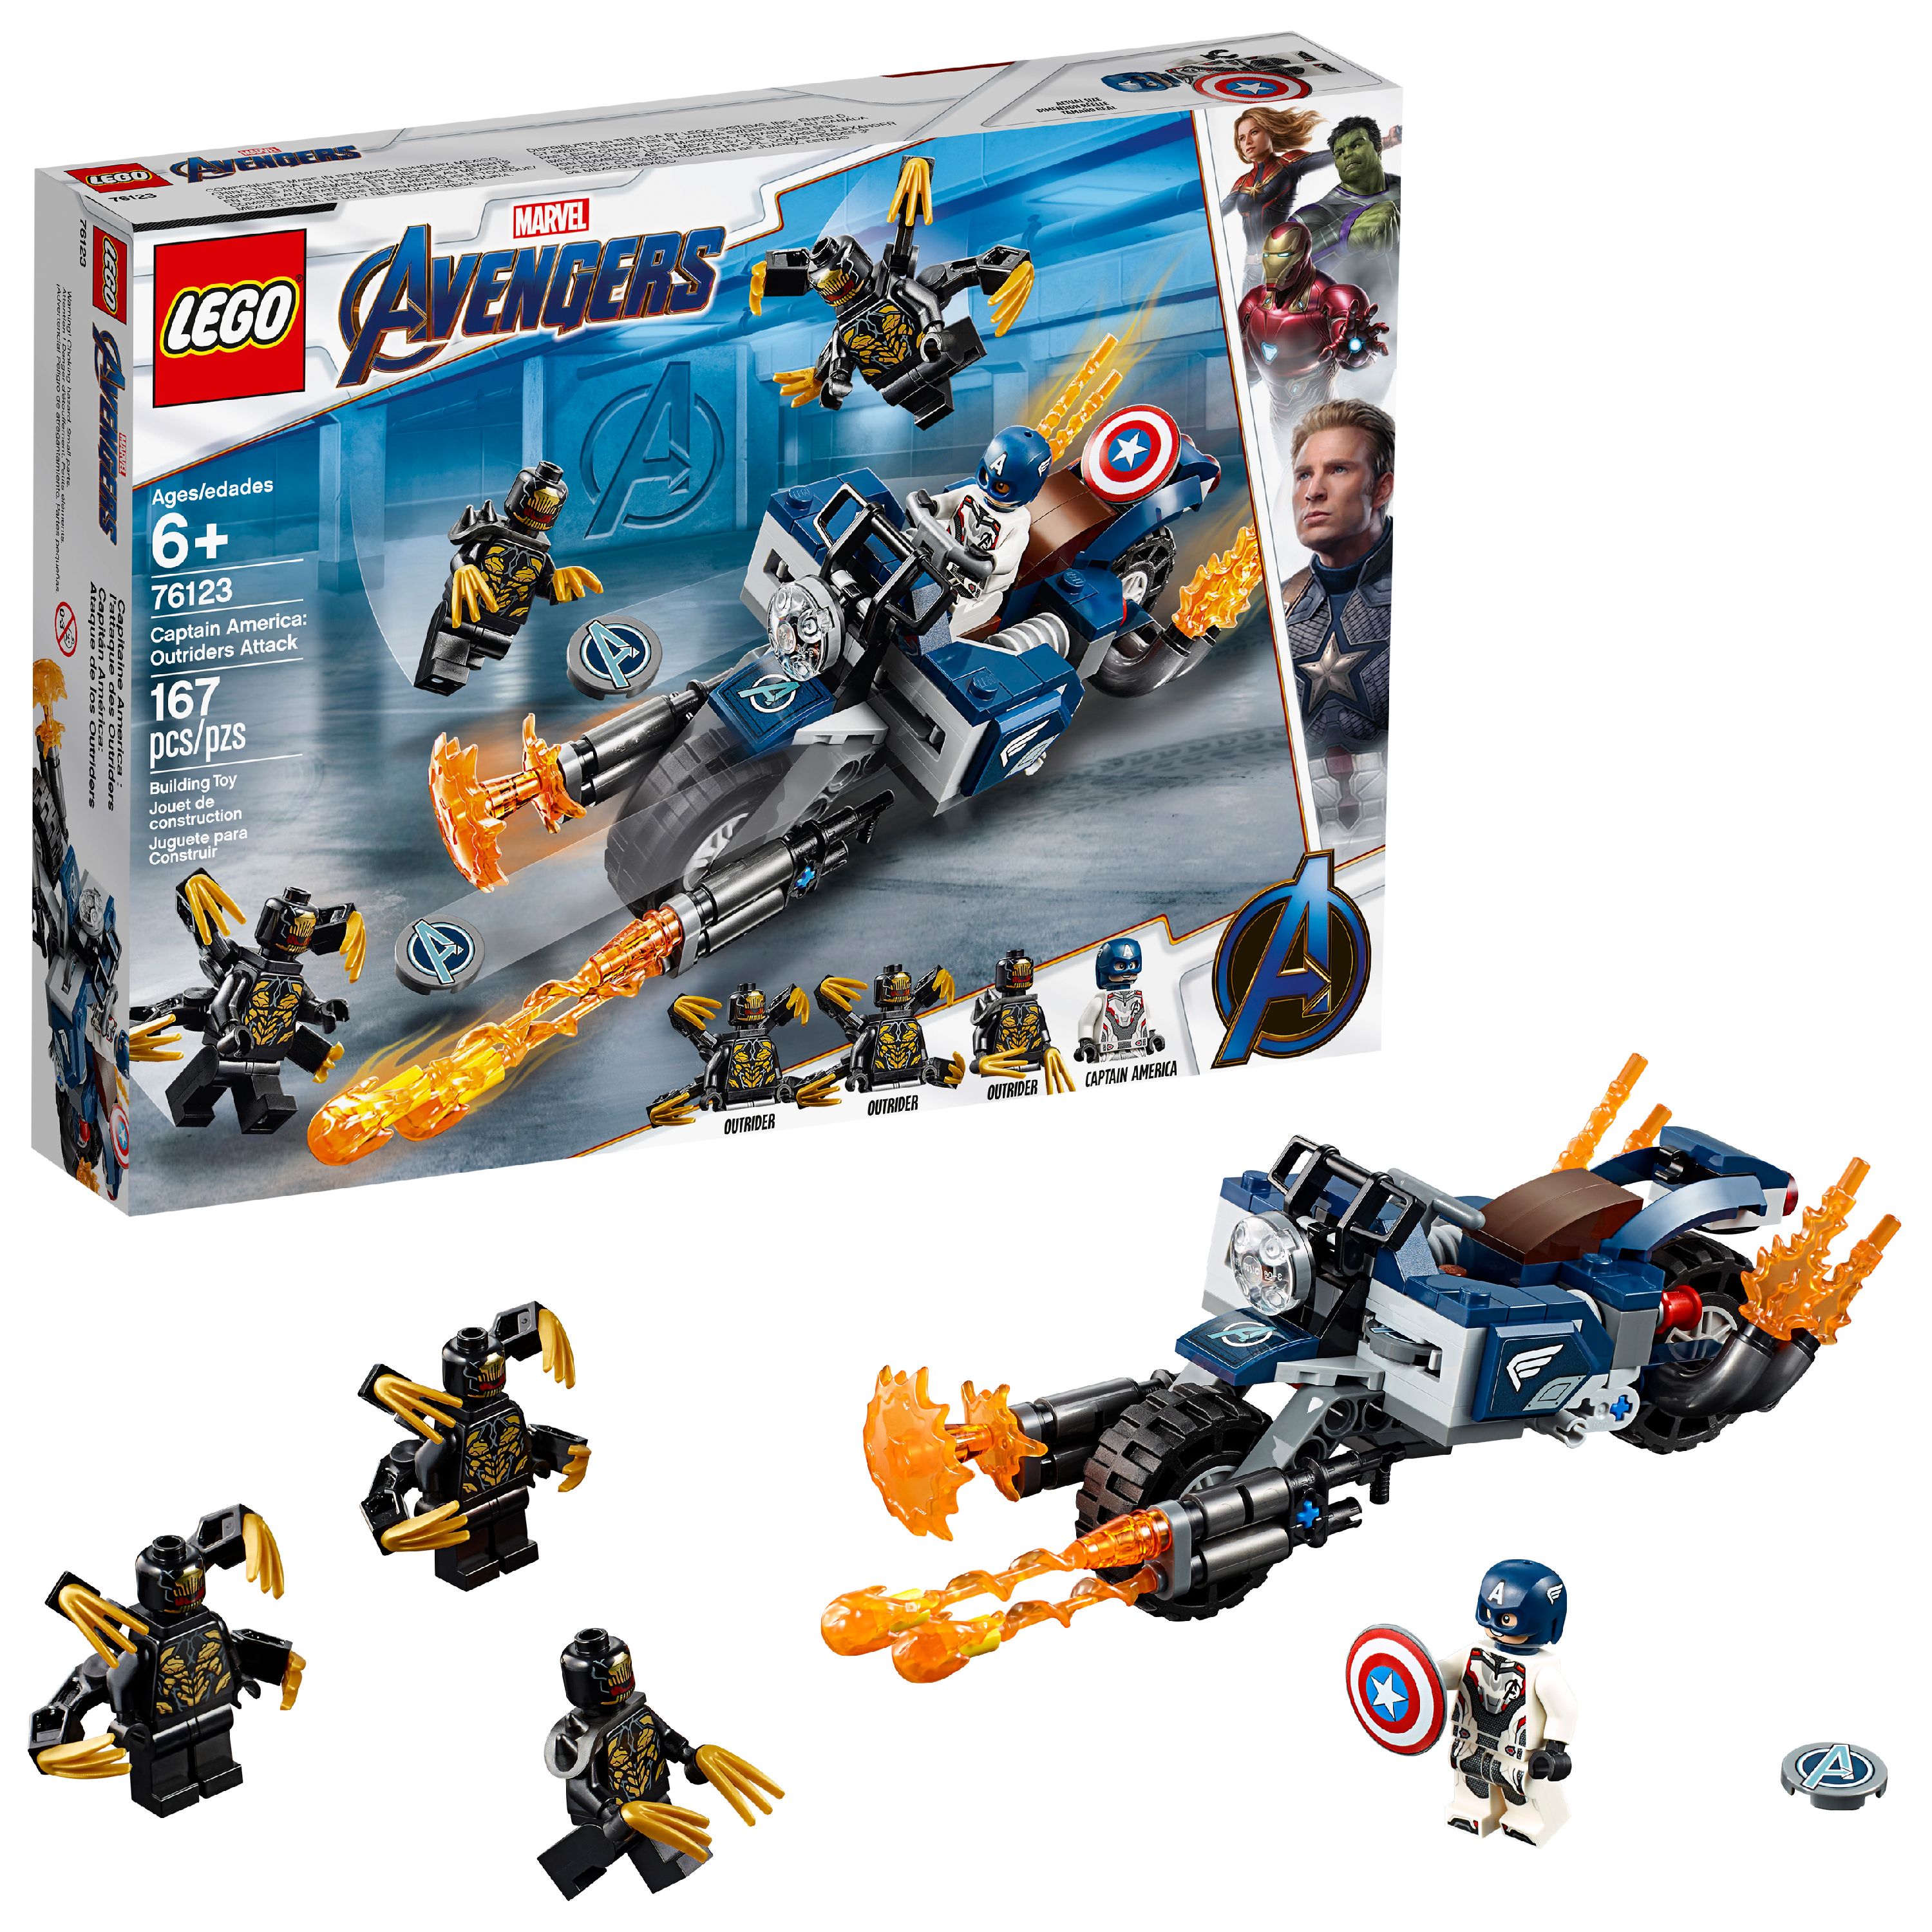 LEGO Marvel Avengers Captain America: Outriders Attack 76123 - image 1 of 8